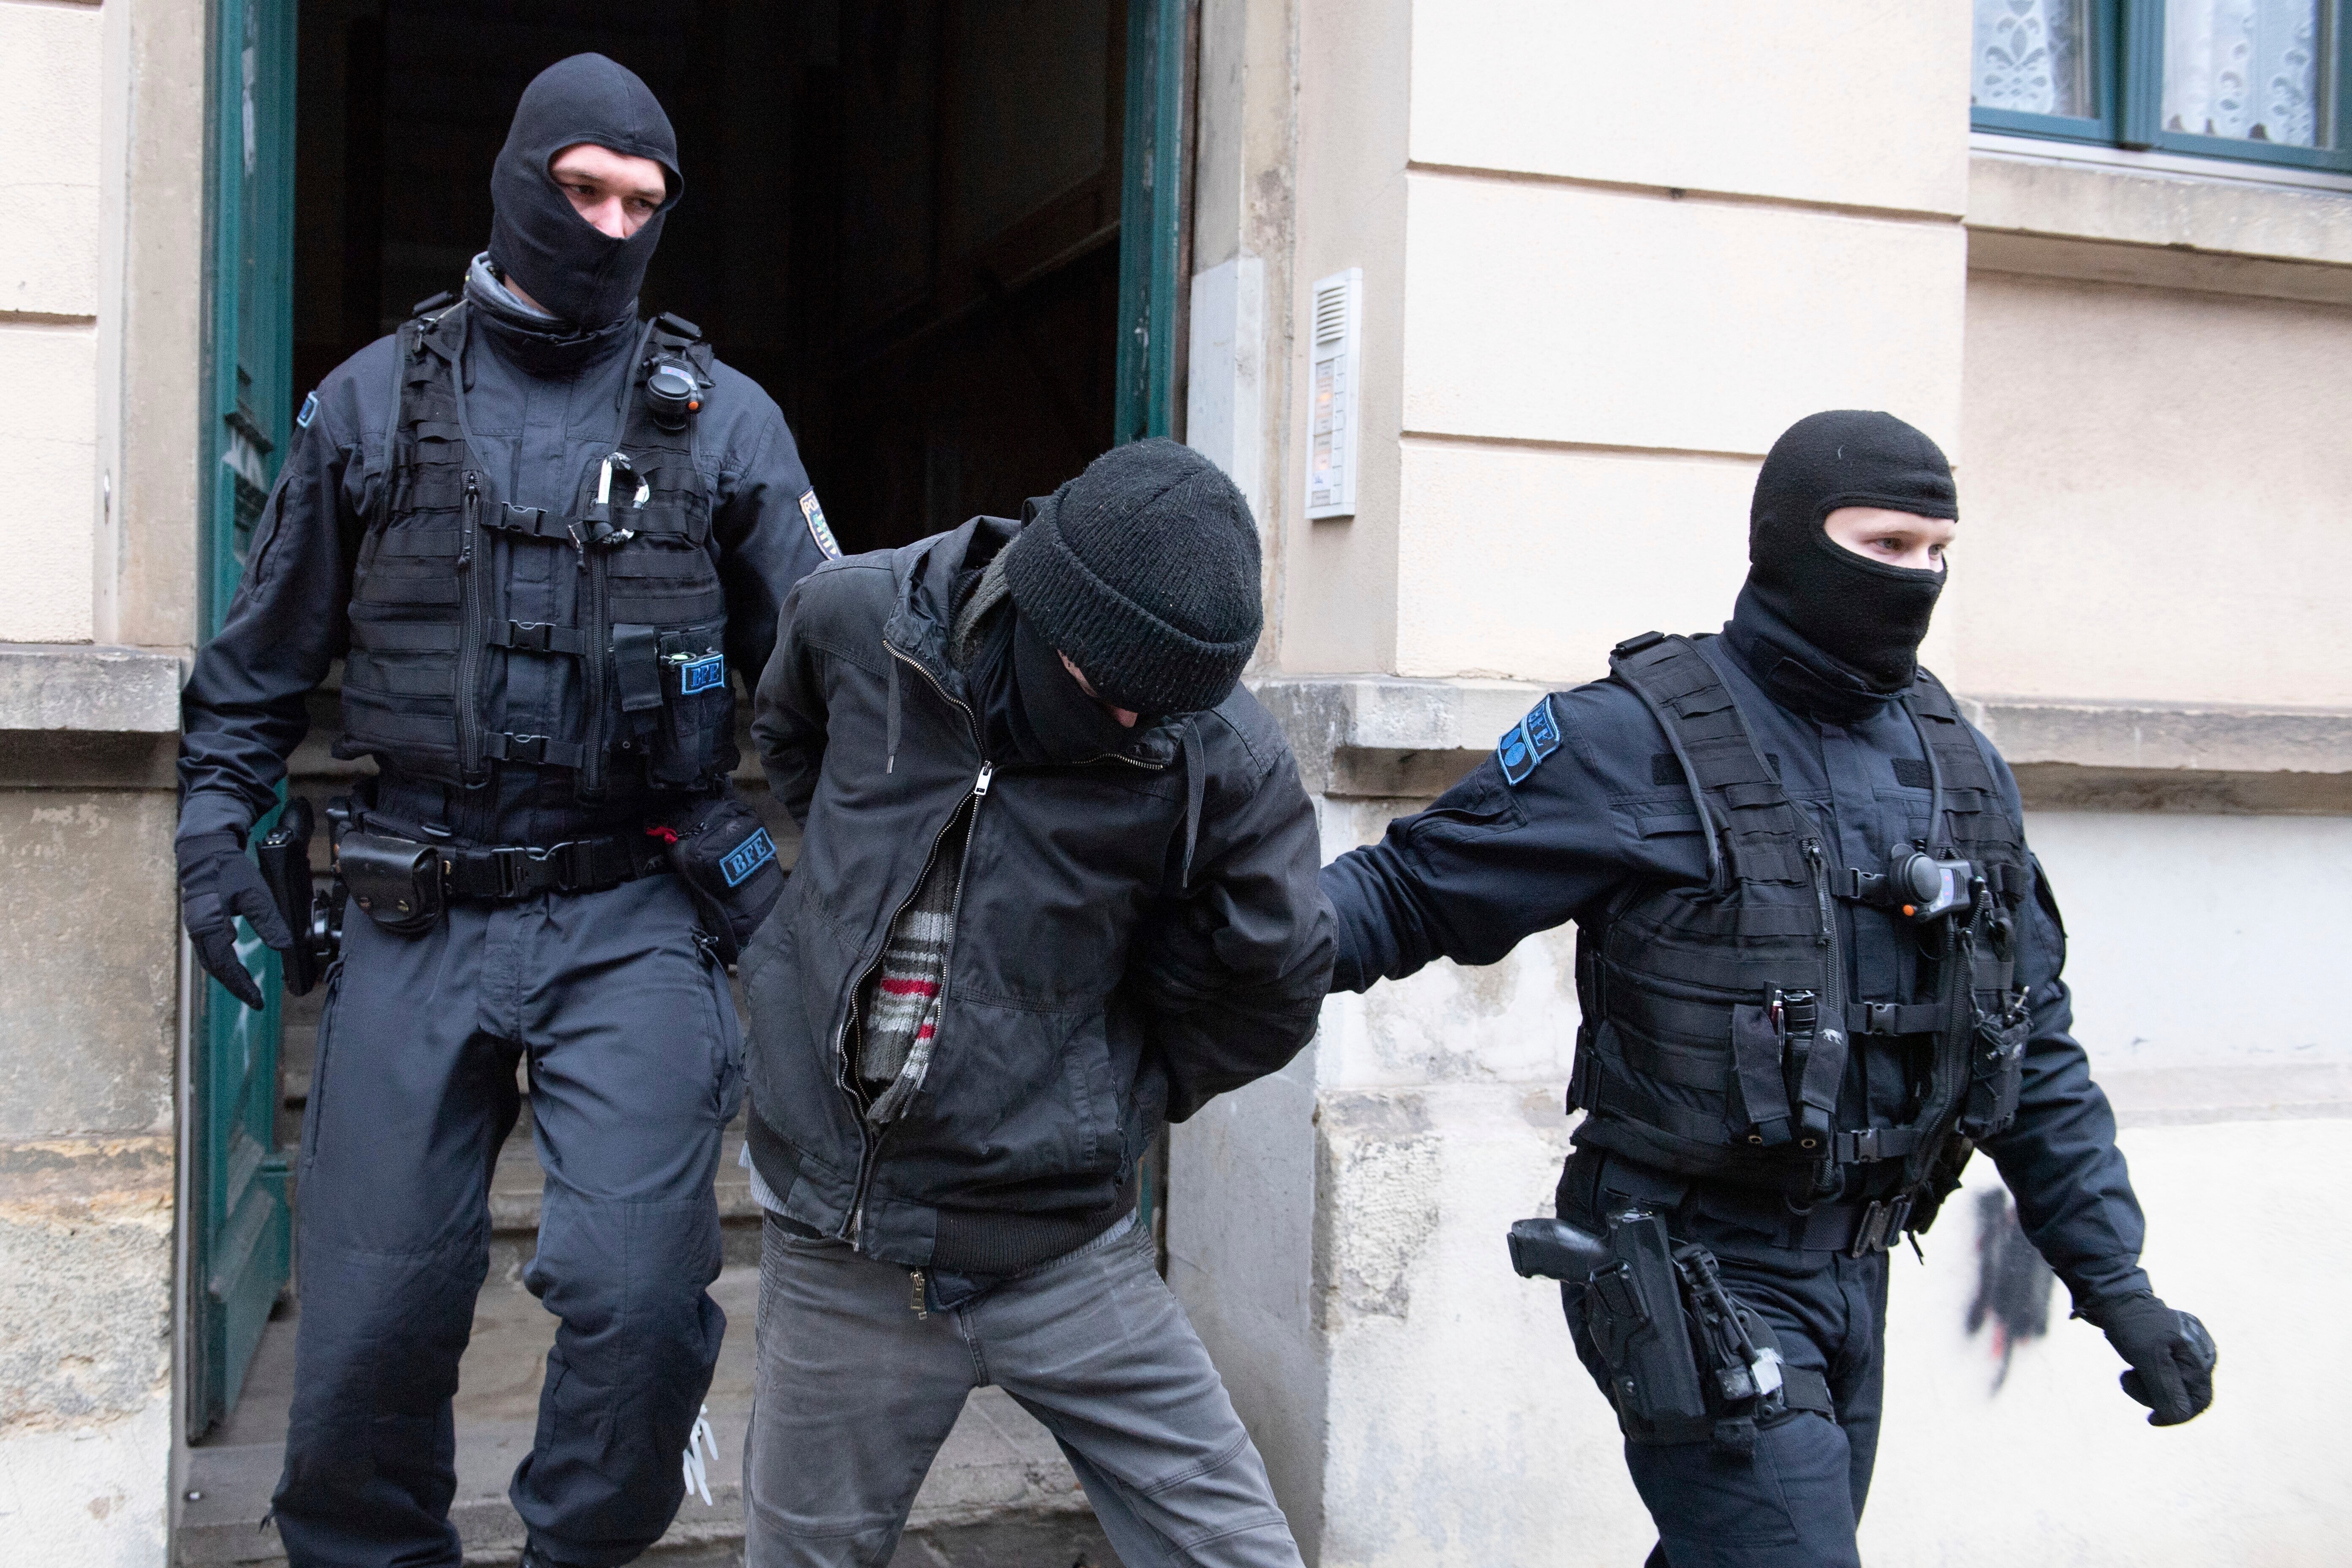 Police officers lead a suspect out of a building entrance during a raid in the Pieschen district of Dresden